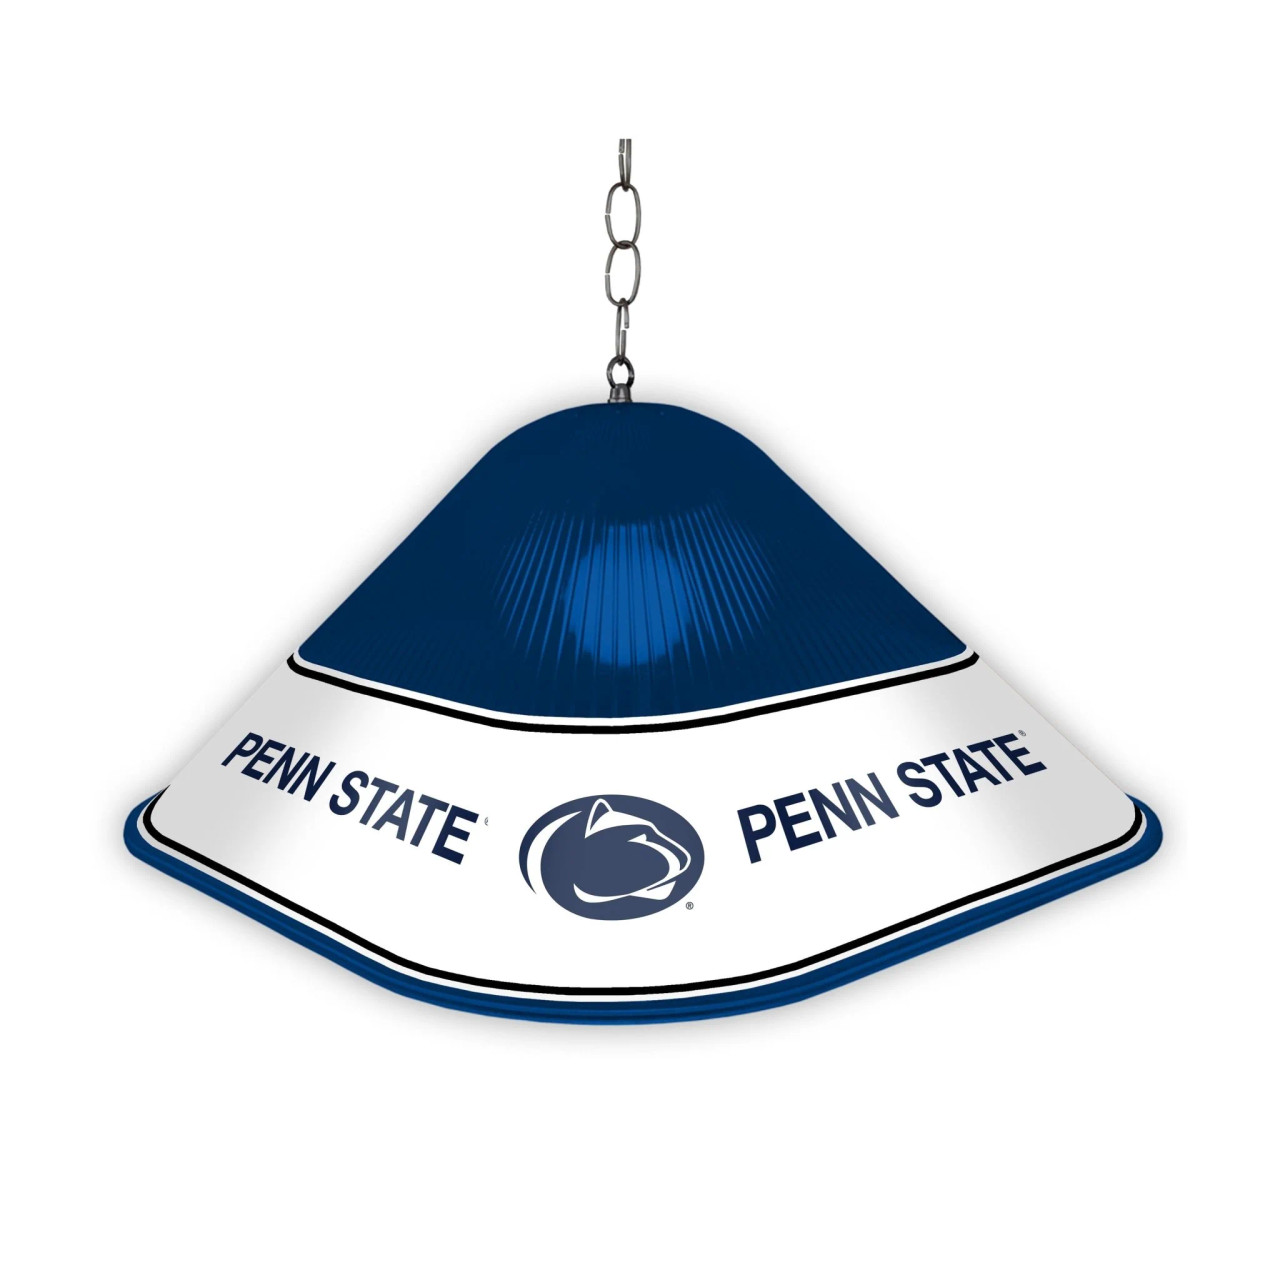 Penn State, PSU, Nittany, Lions, Game, Room, Cave, Table, Light, Lamp, NCPNST-410-01A, NCPNST-410-01B, The Fan-Brand, 689481024417